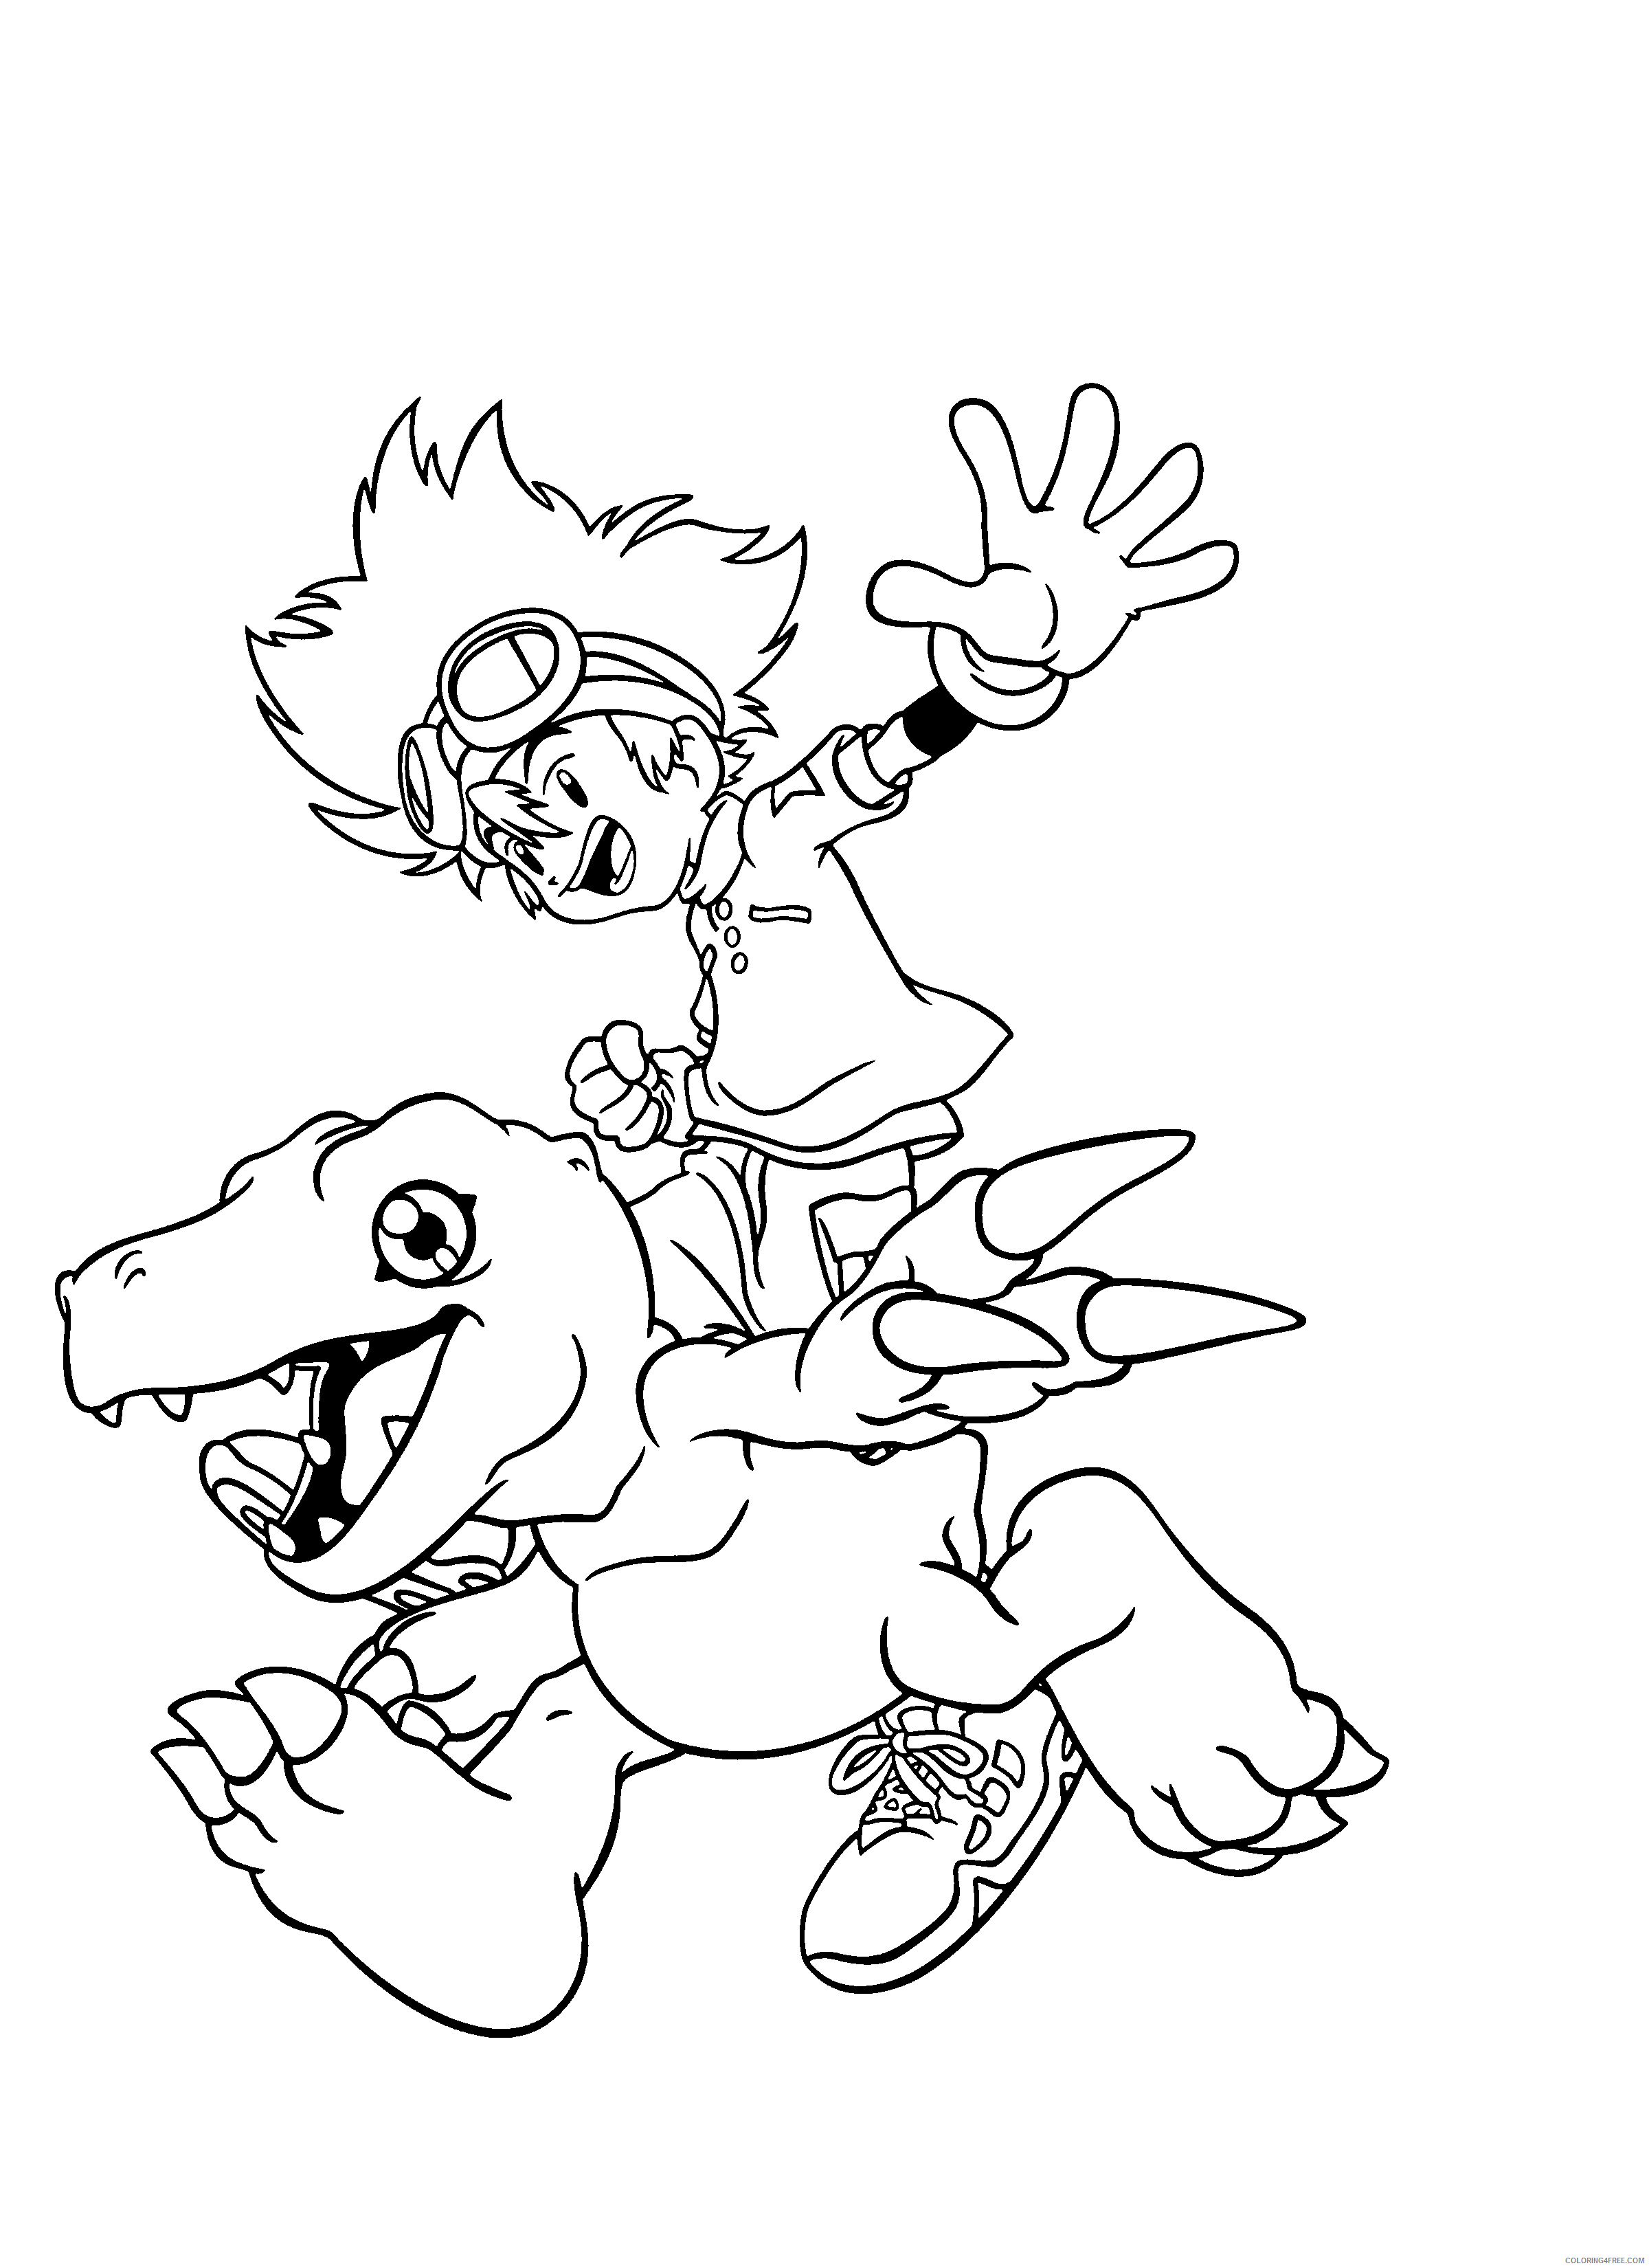 Digimon Printable Coloring Pages Anime digimon 239 2021 0321 Coloring4free